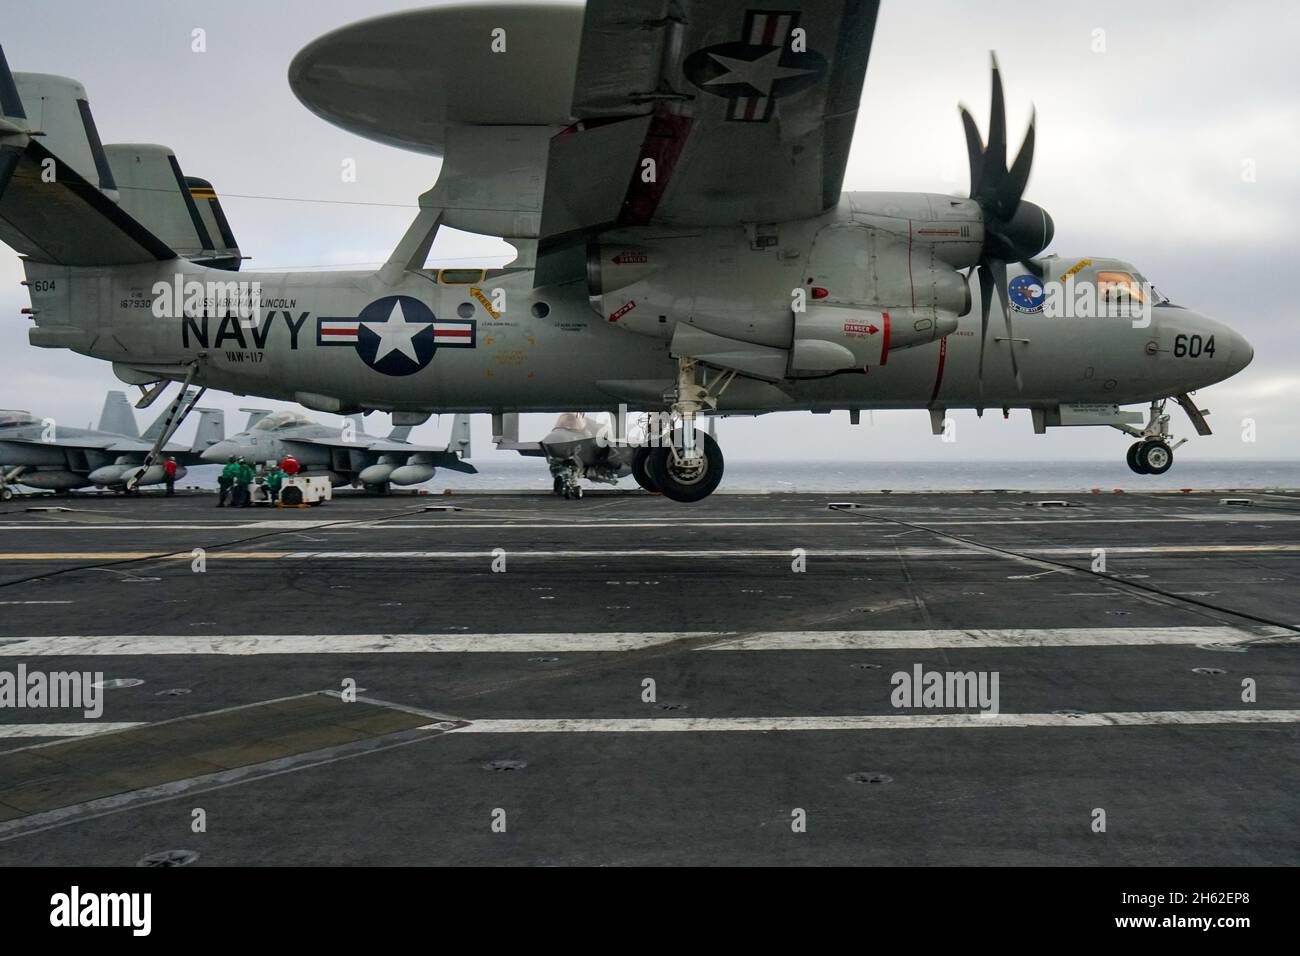 A E-2D Hawkeye early warning and detection aircraft lands on the deck of a United States Navy aircraft carrier Stock Photo